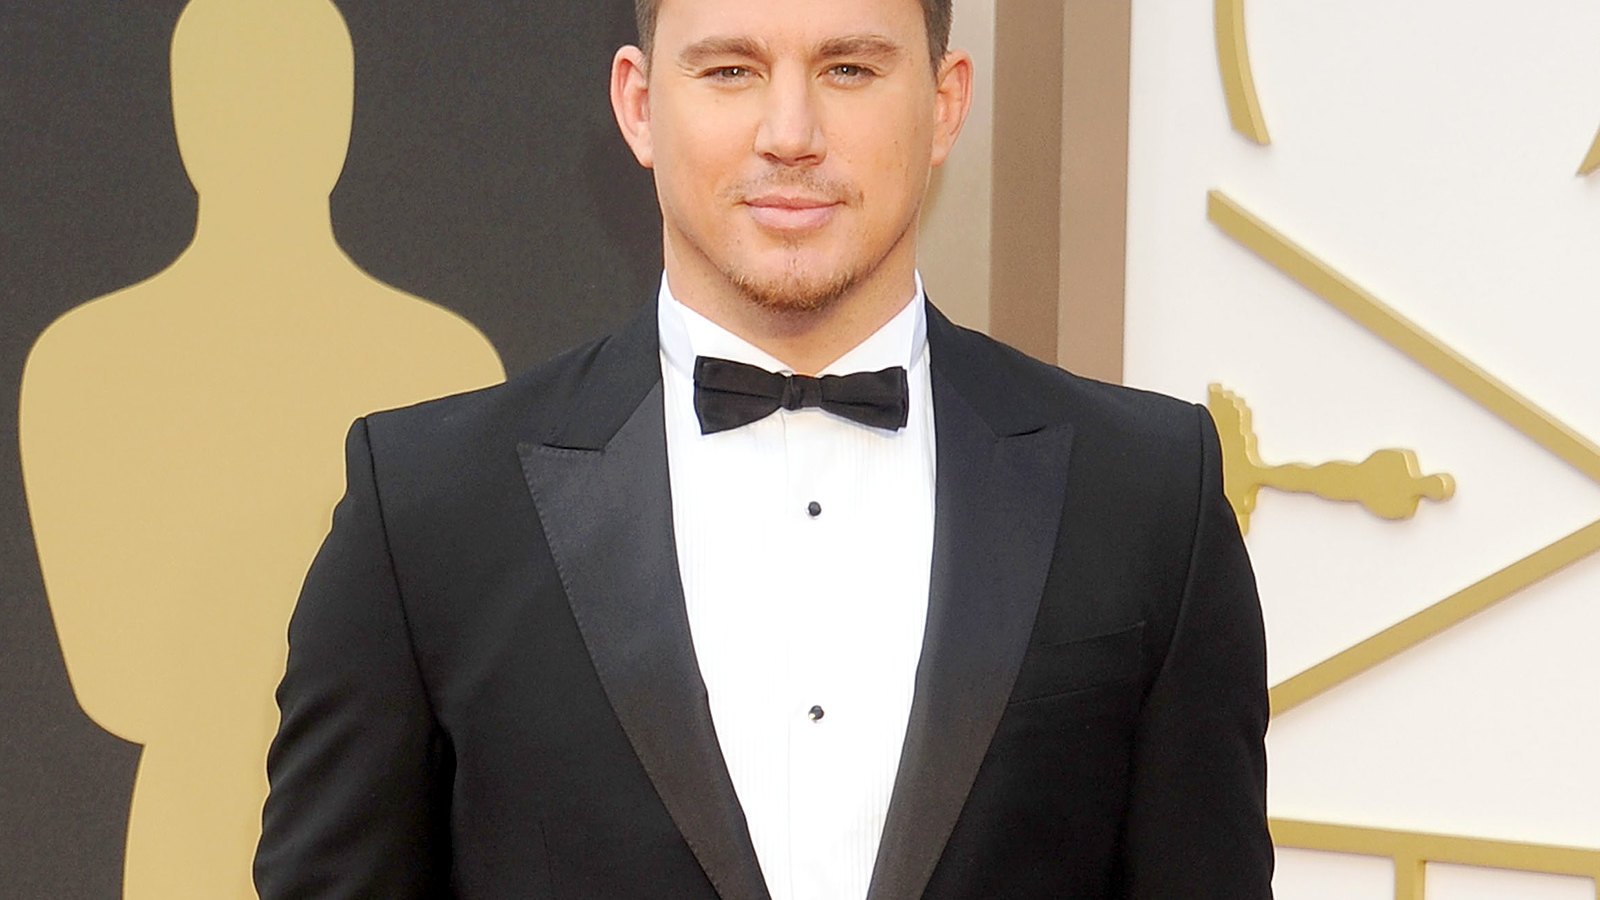 Channing Tatum at the 86th Annual Academy Awards on March 2, 2014.